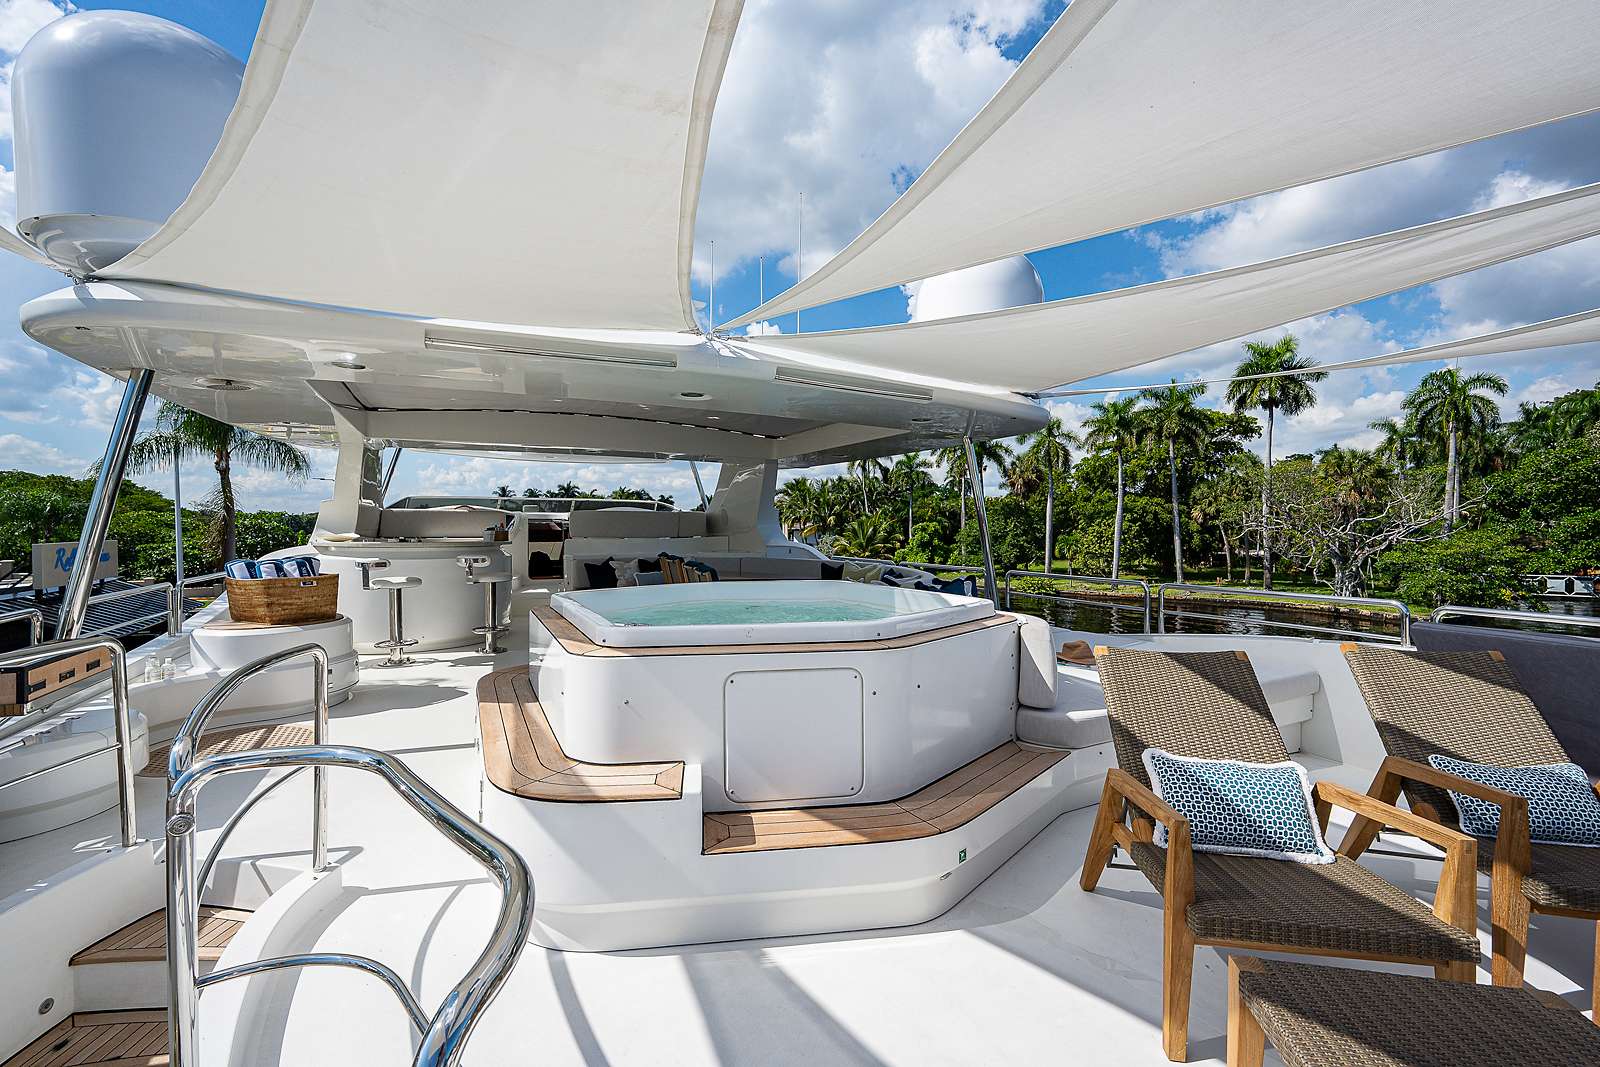 Sweet Emocean Yacht Charter - Upper deck with removable shade